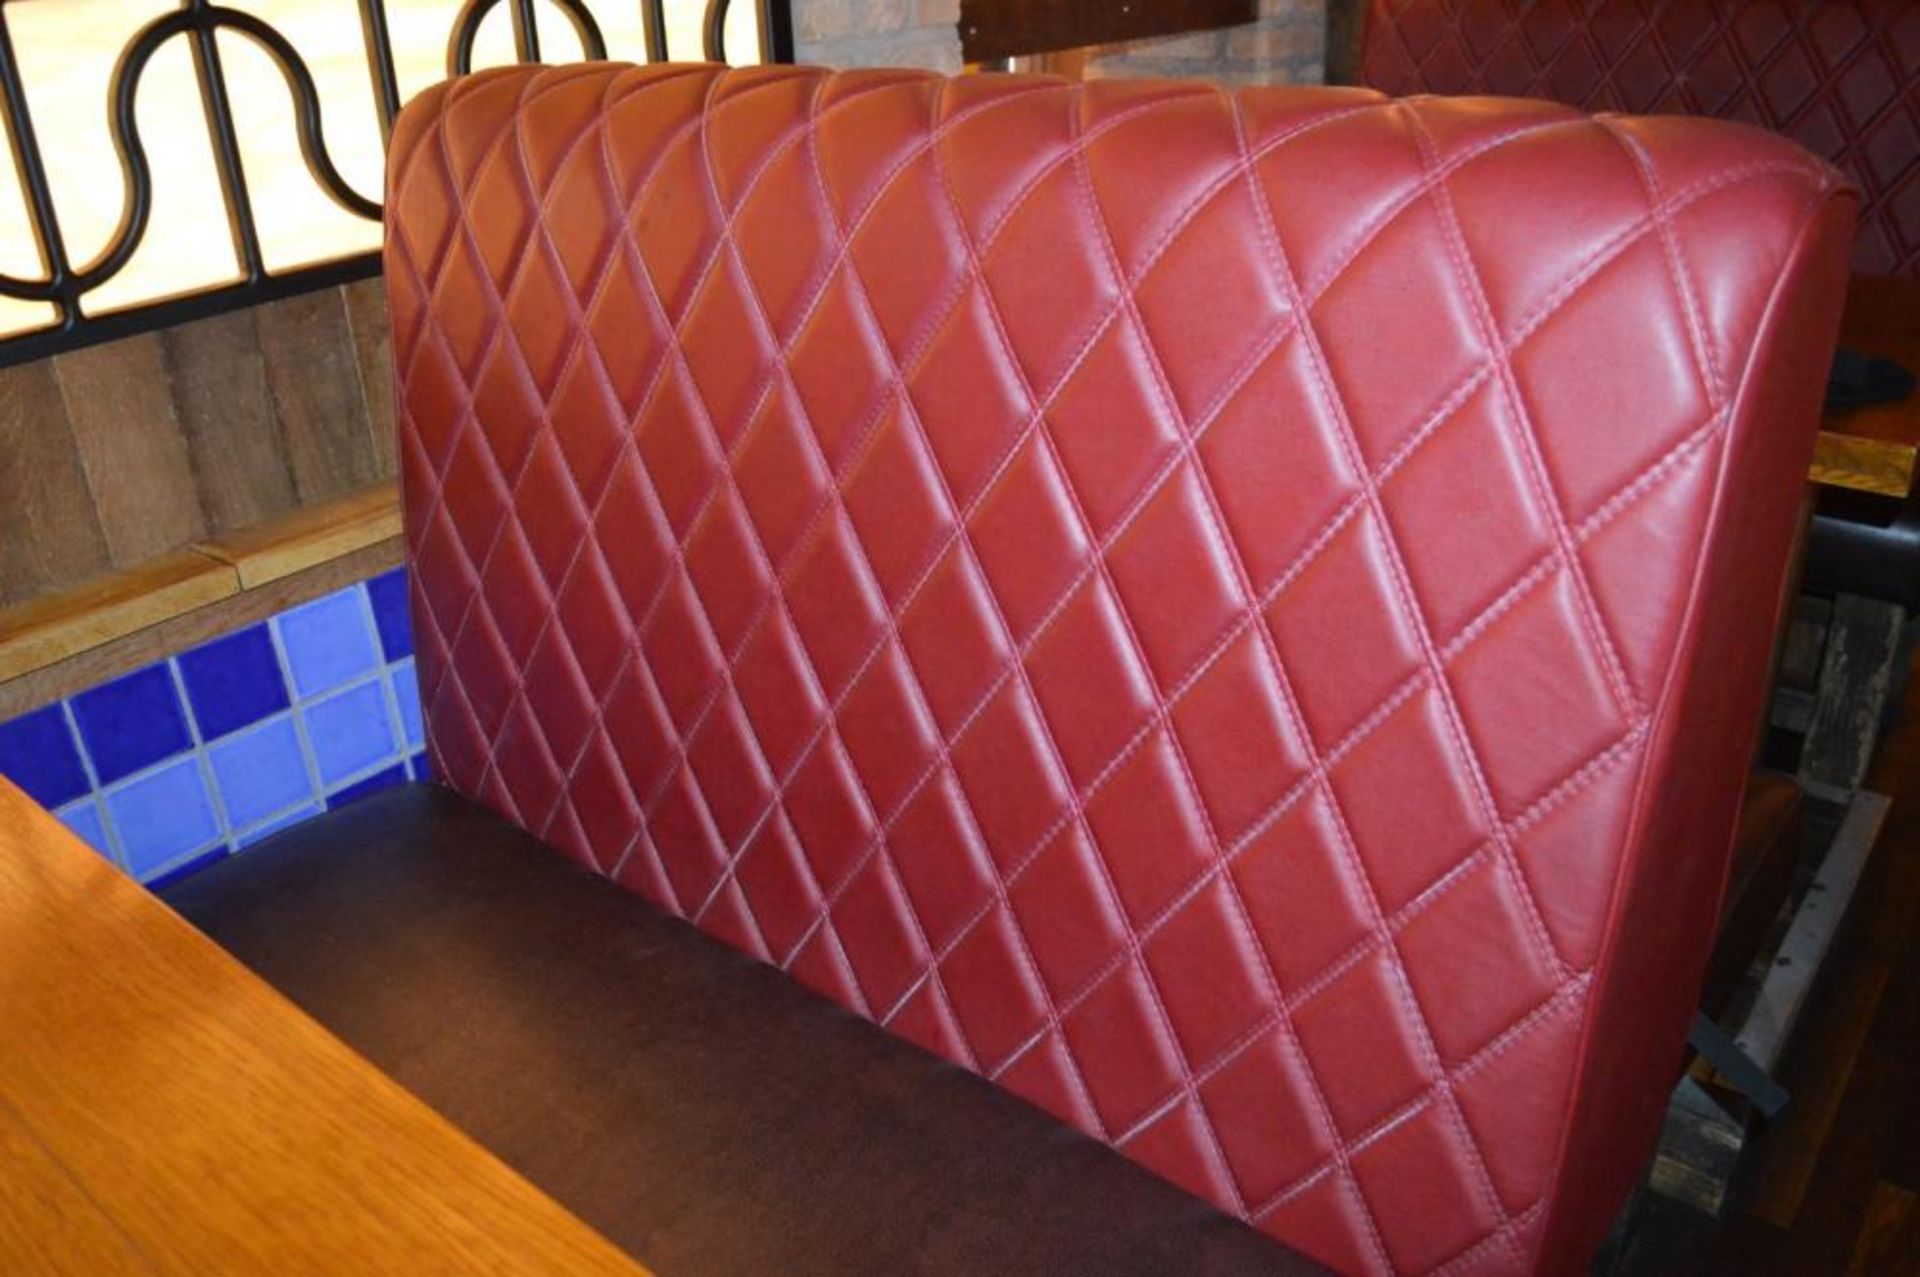 13 x Selection of Contemporary Restaurant Seating With Red and Brown Faux Leather Upholstery and - Image 7 of 8